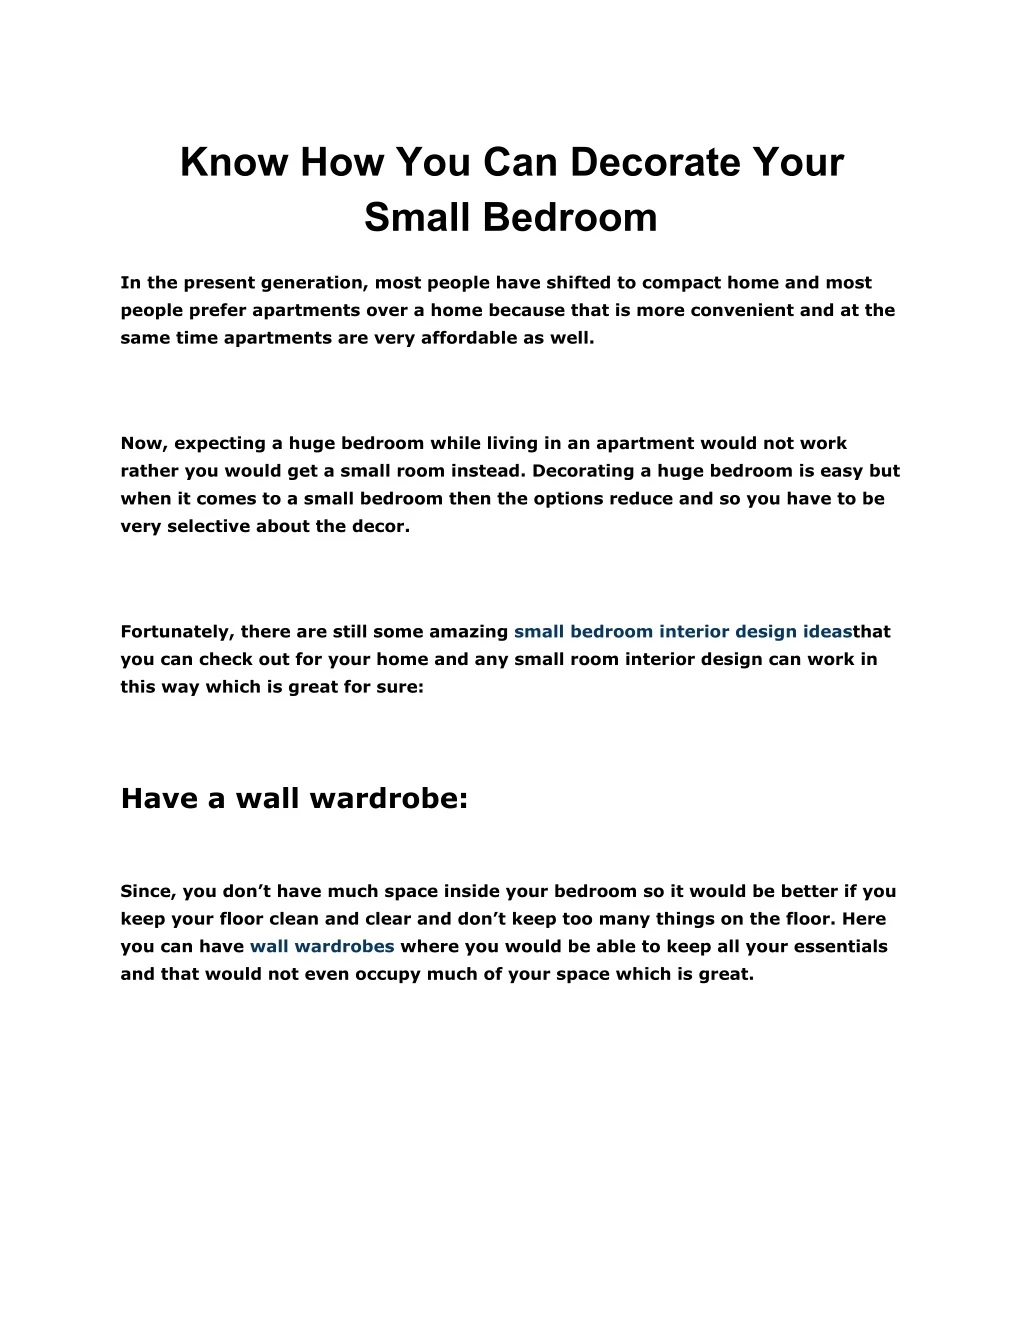 know how you can decorate your small bedroom